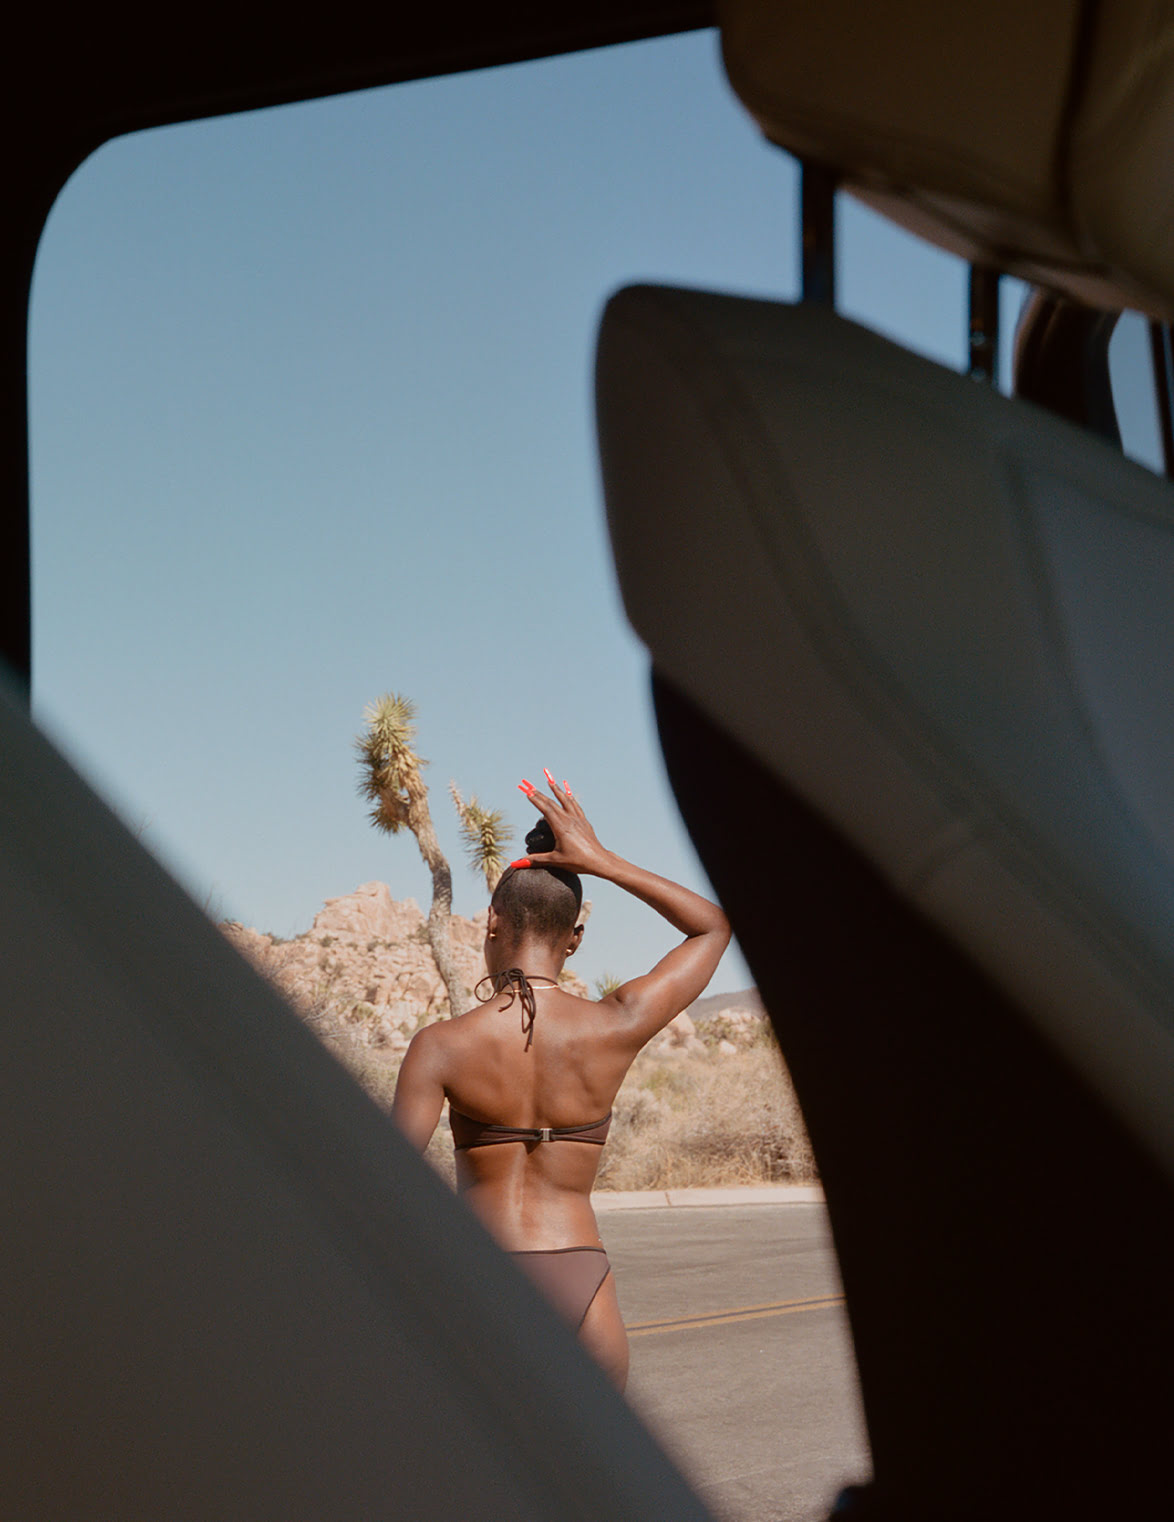 Picture of Alicia Keys in the desert next to Mercedes-Benz.